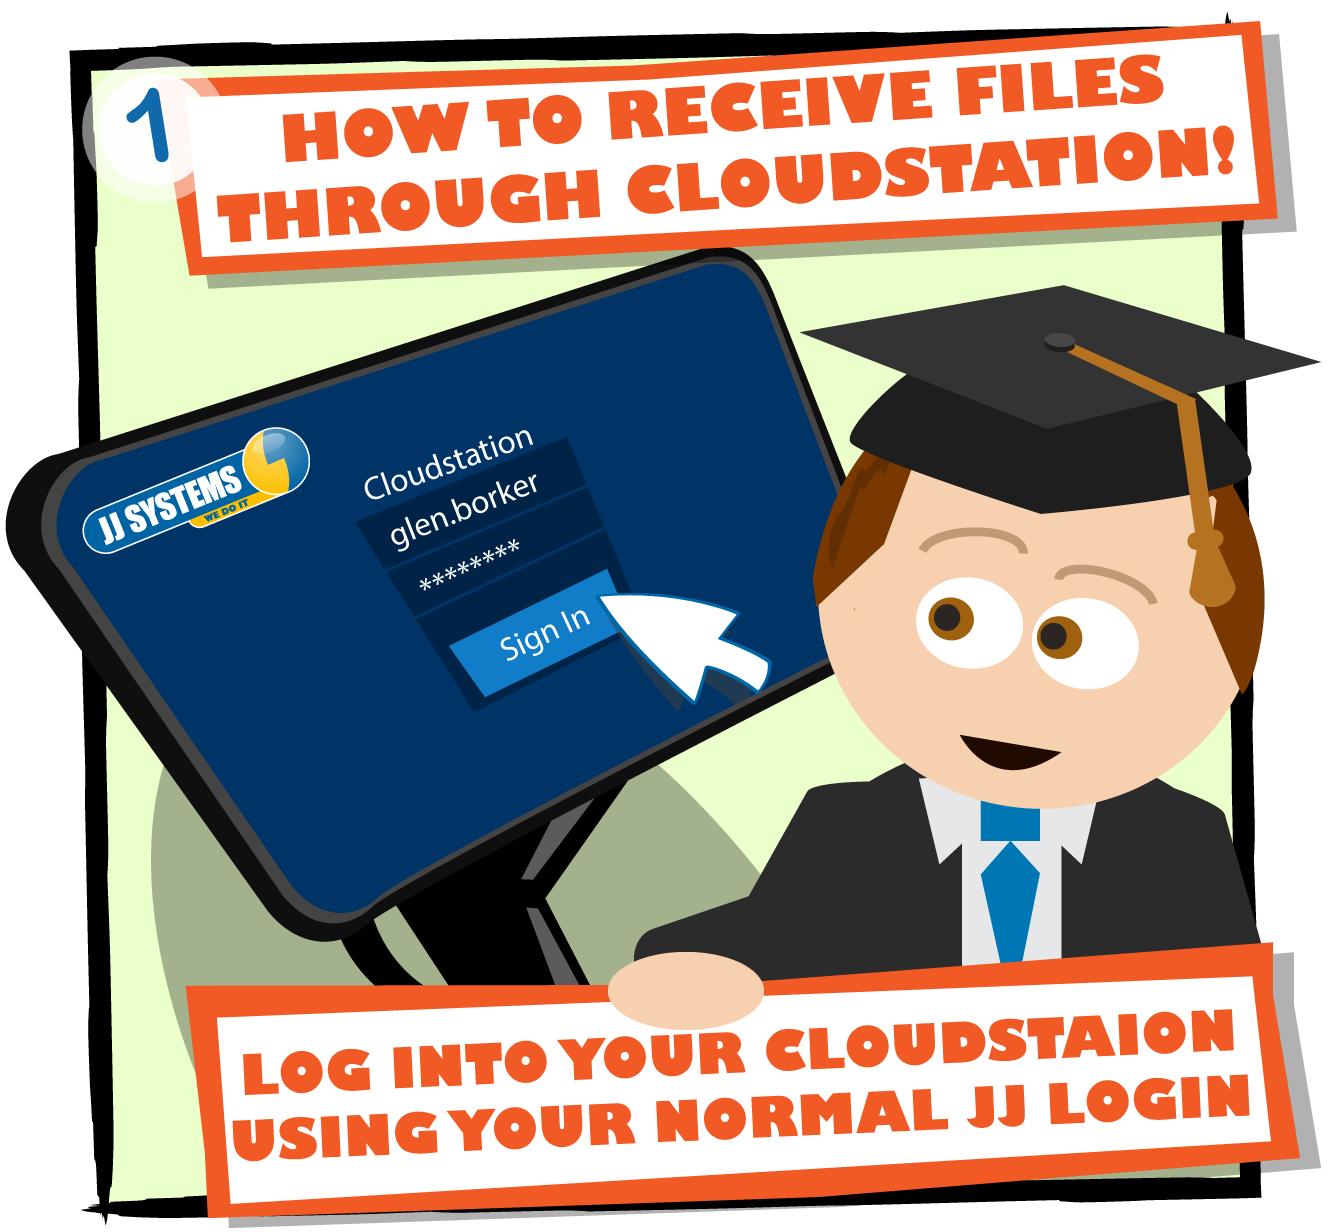 Log into cloudstation with your usual username and password